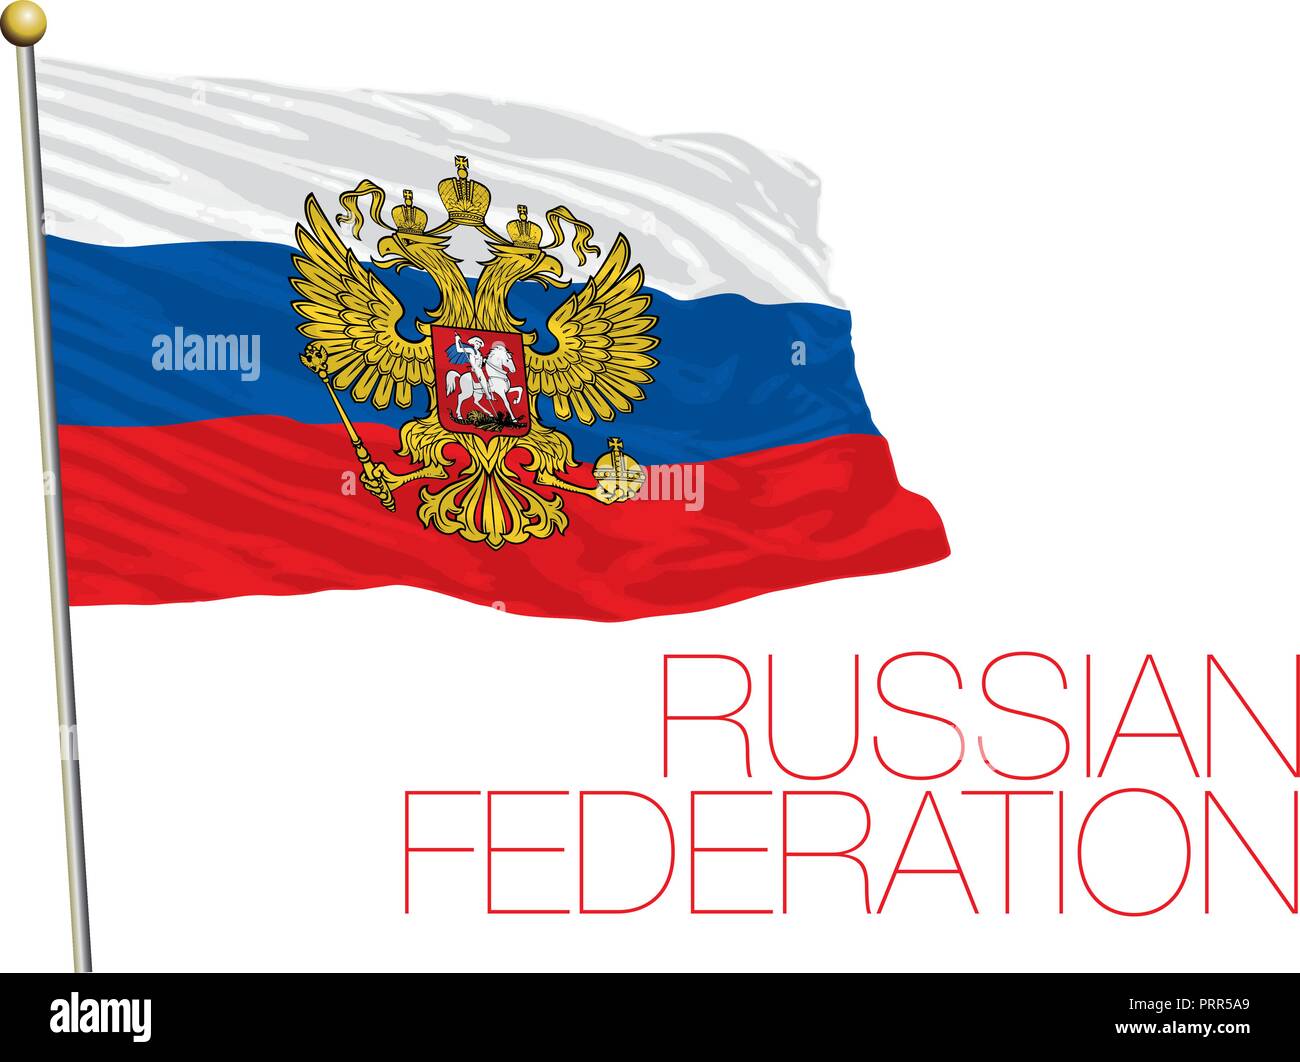 Russia federation official flag, vector illustration Stock Vector